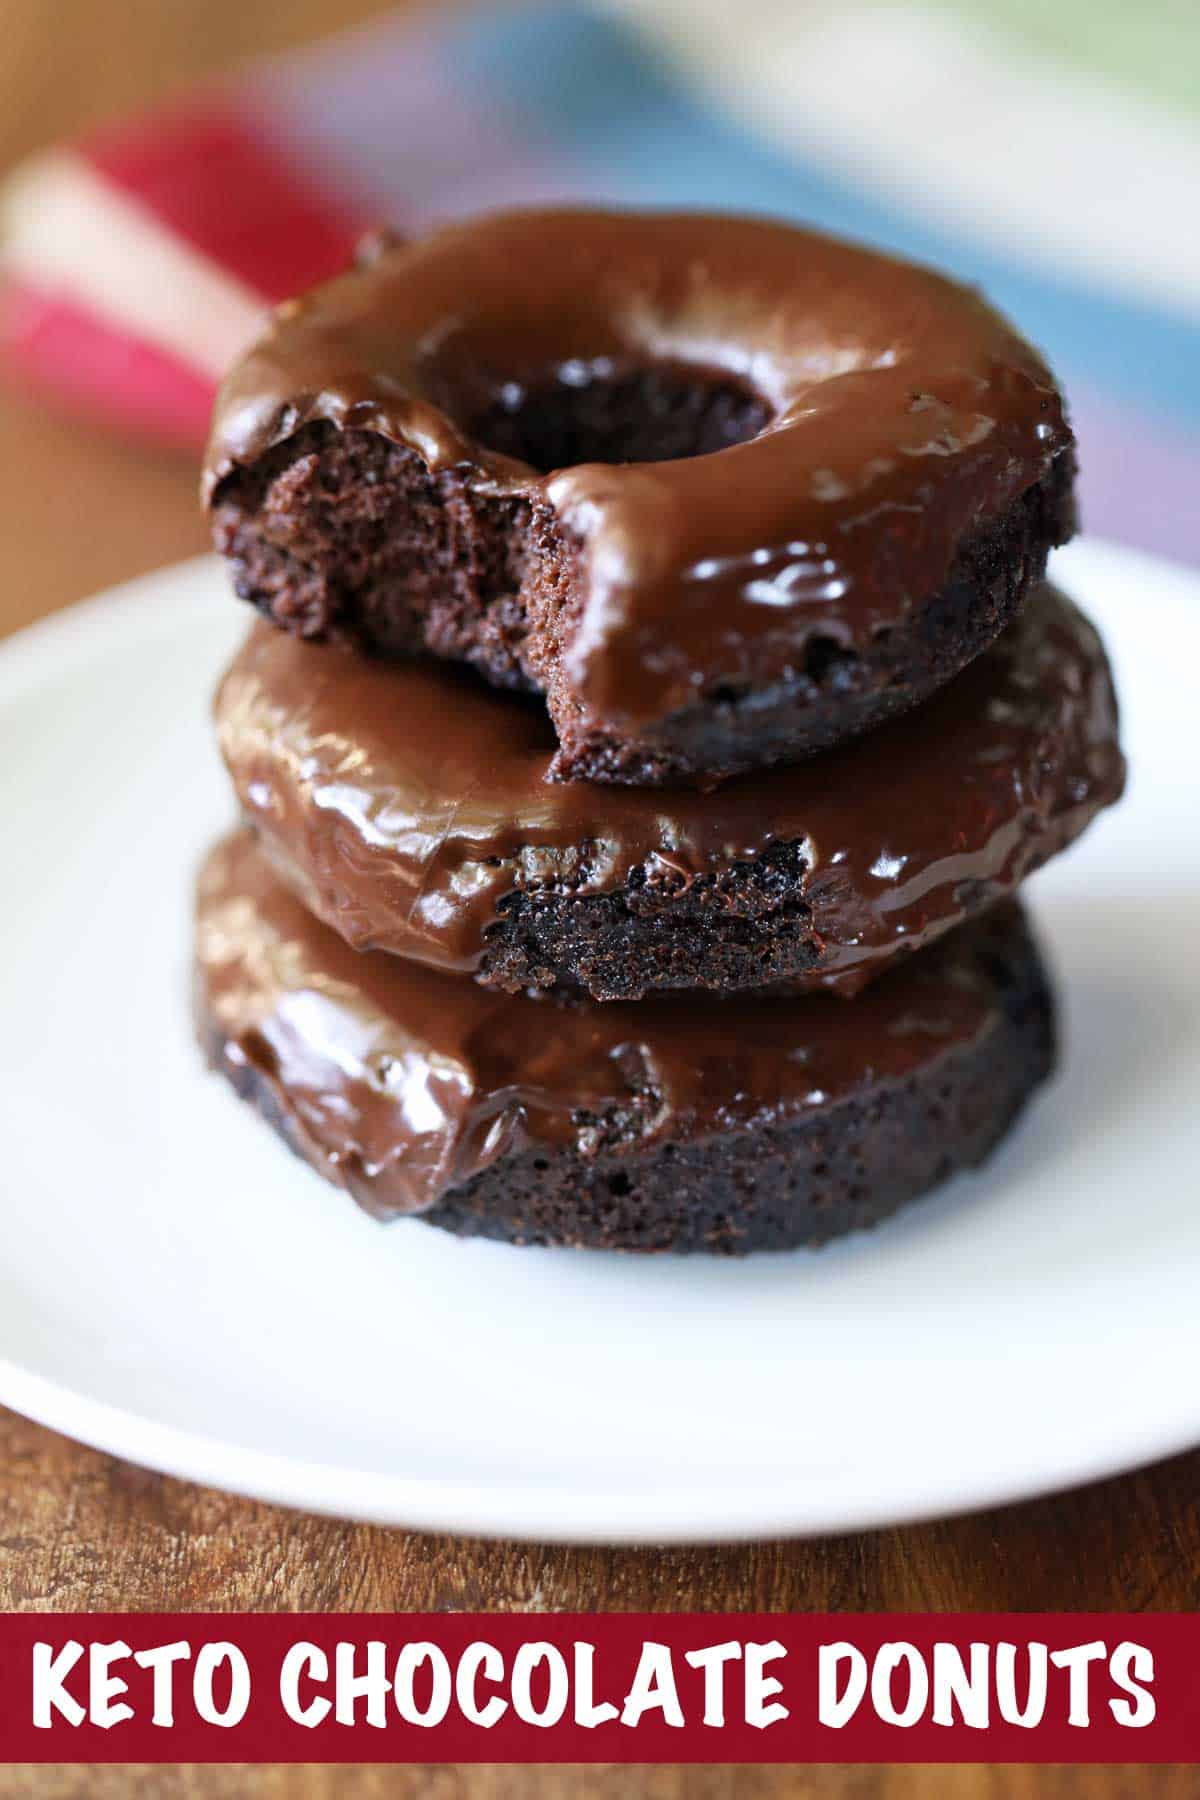 Keto chocolate donuts served on a white plate.